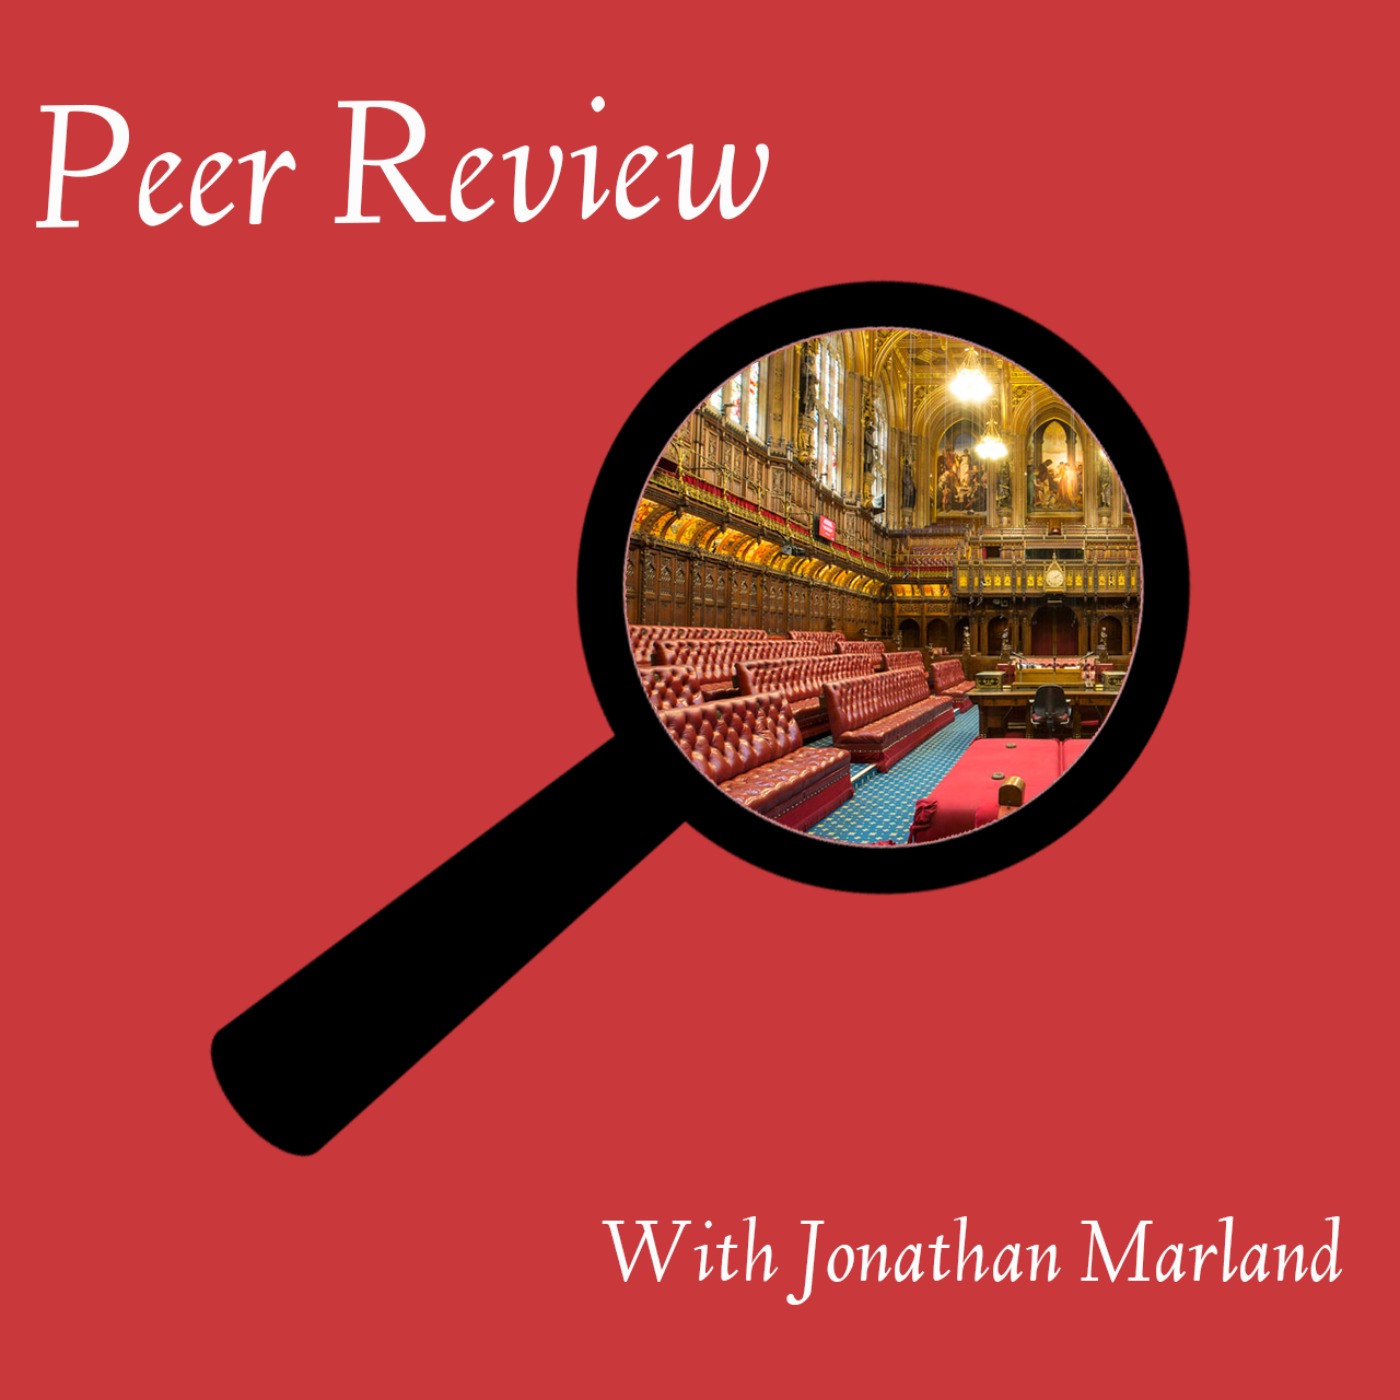 Lord Marland Launches “Peer Review” Podcast Featuring Interviews with House of Lords Peers